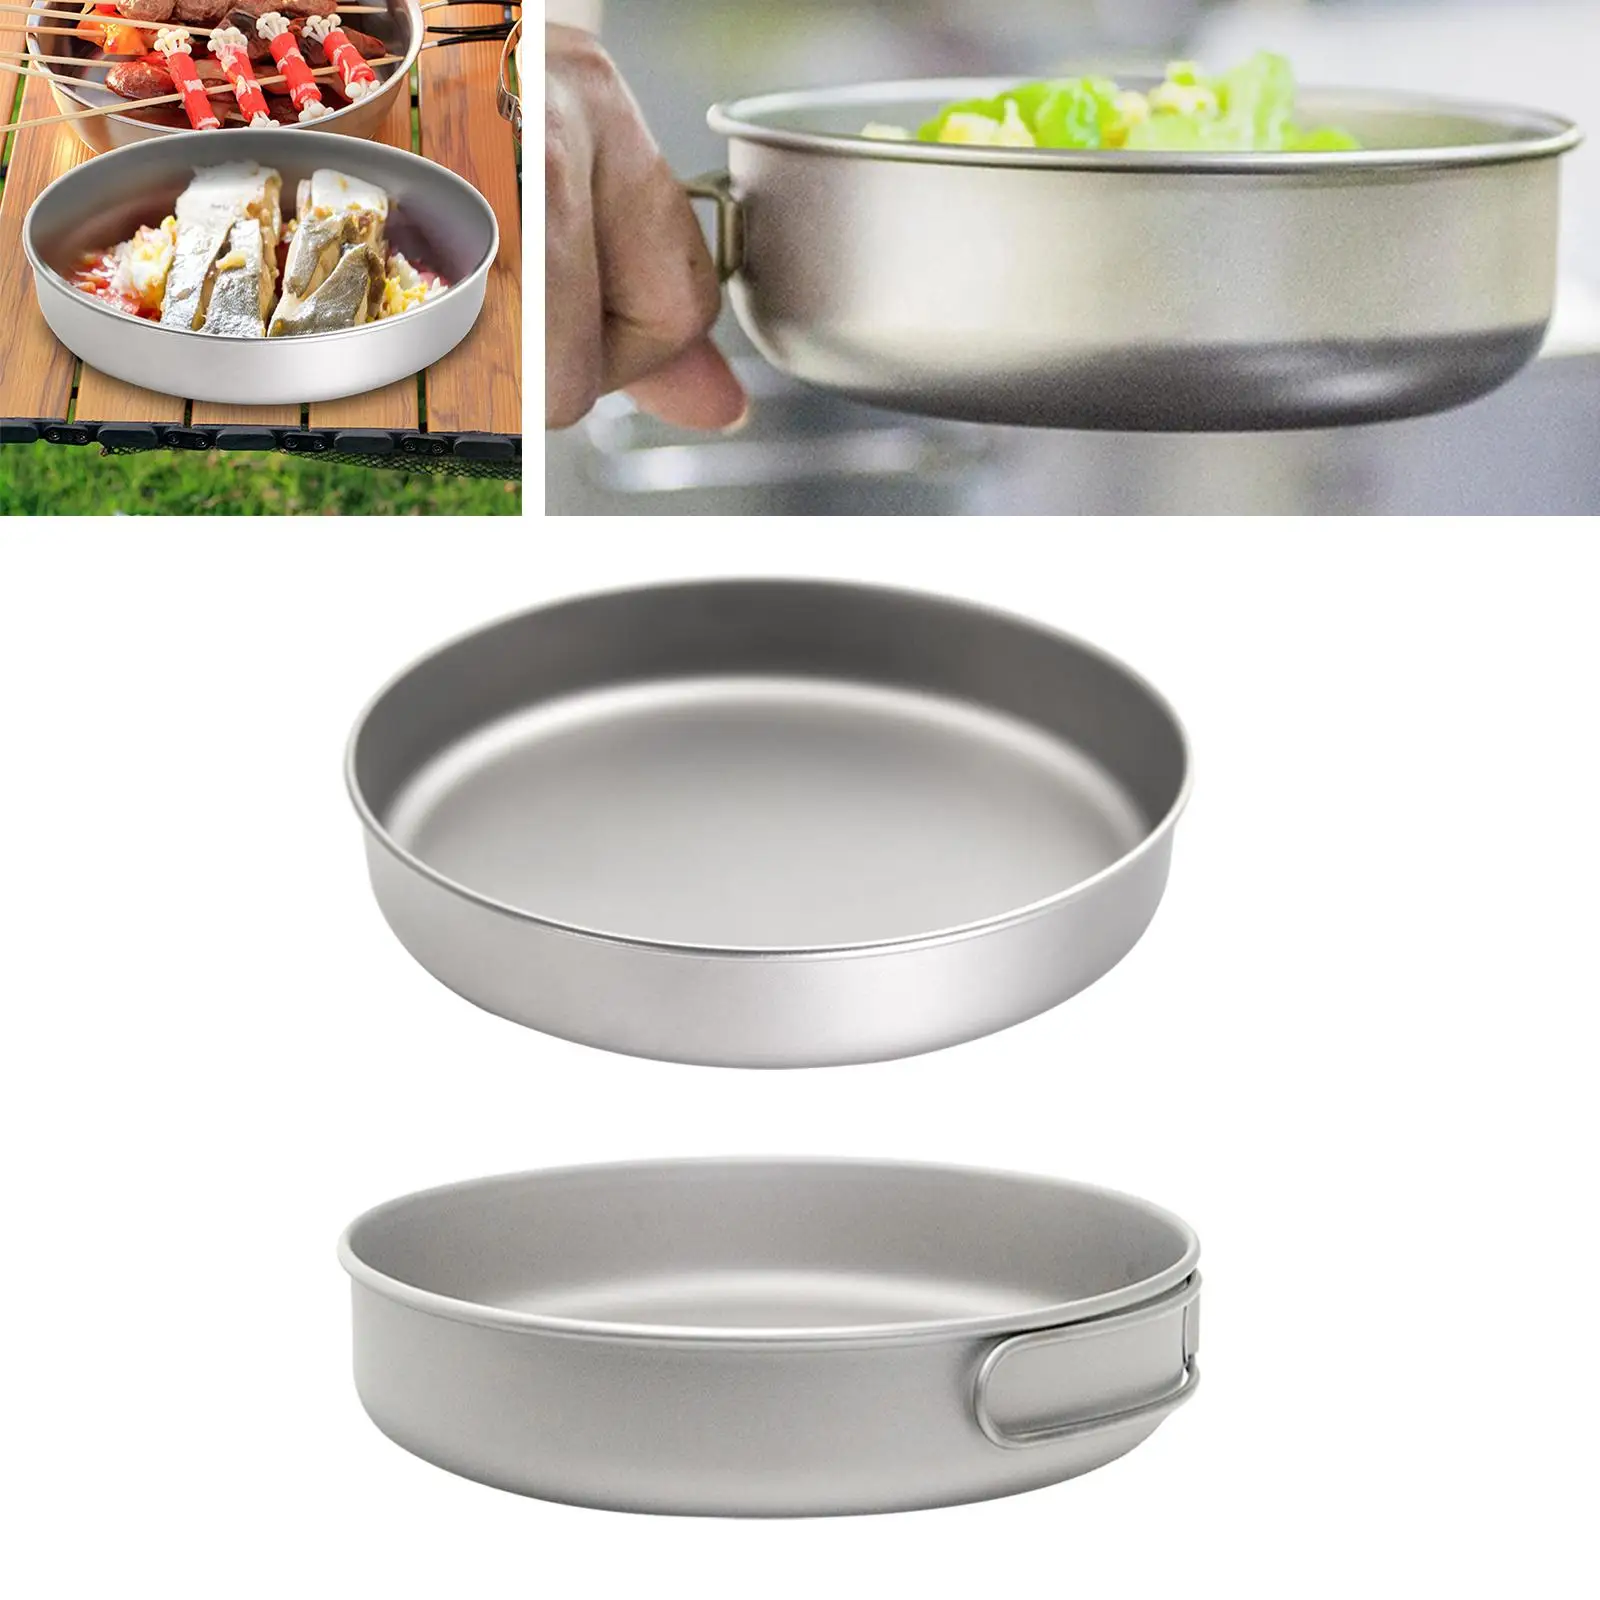 Titanium Pan Camping Cookware Cooking Equipment for Backpacking Hiking